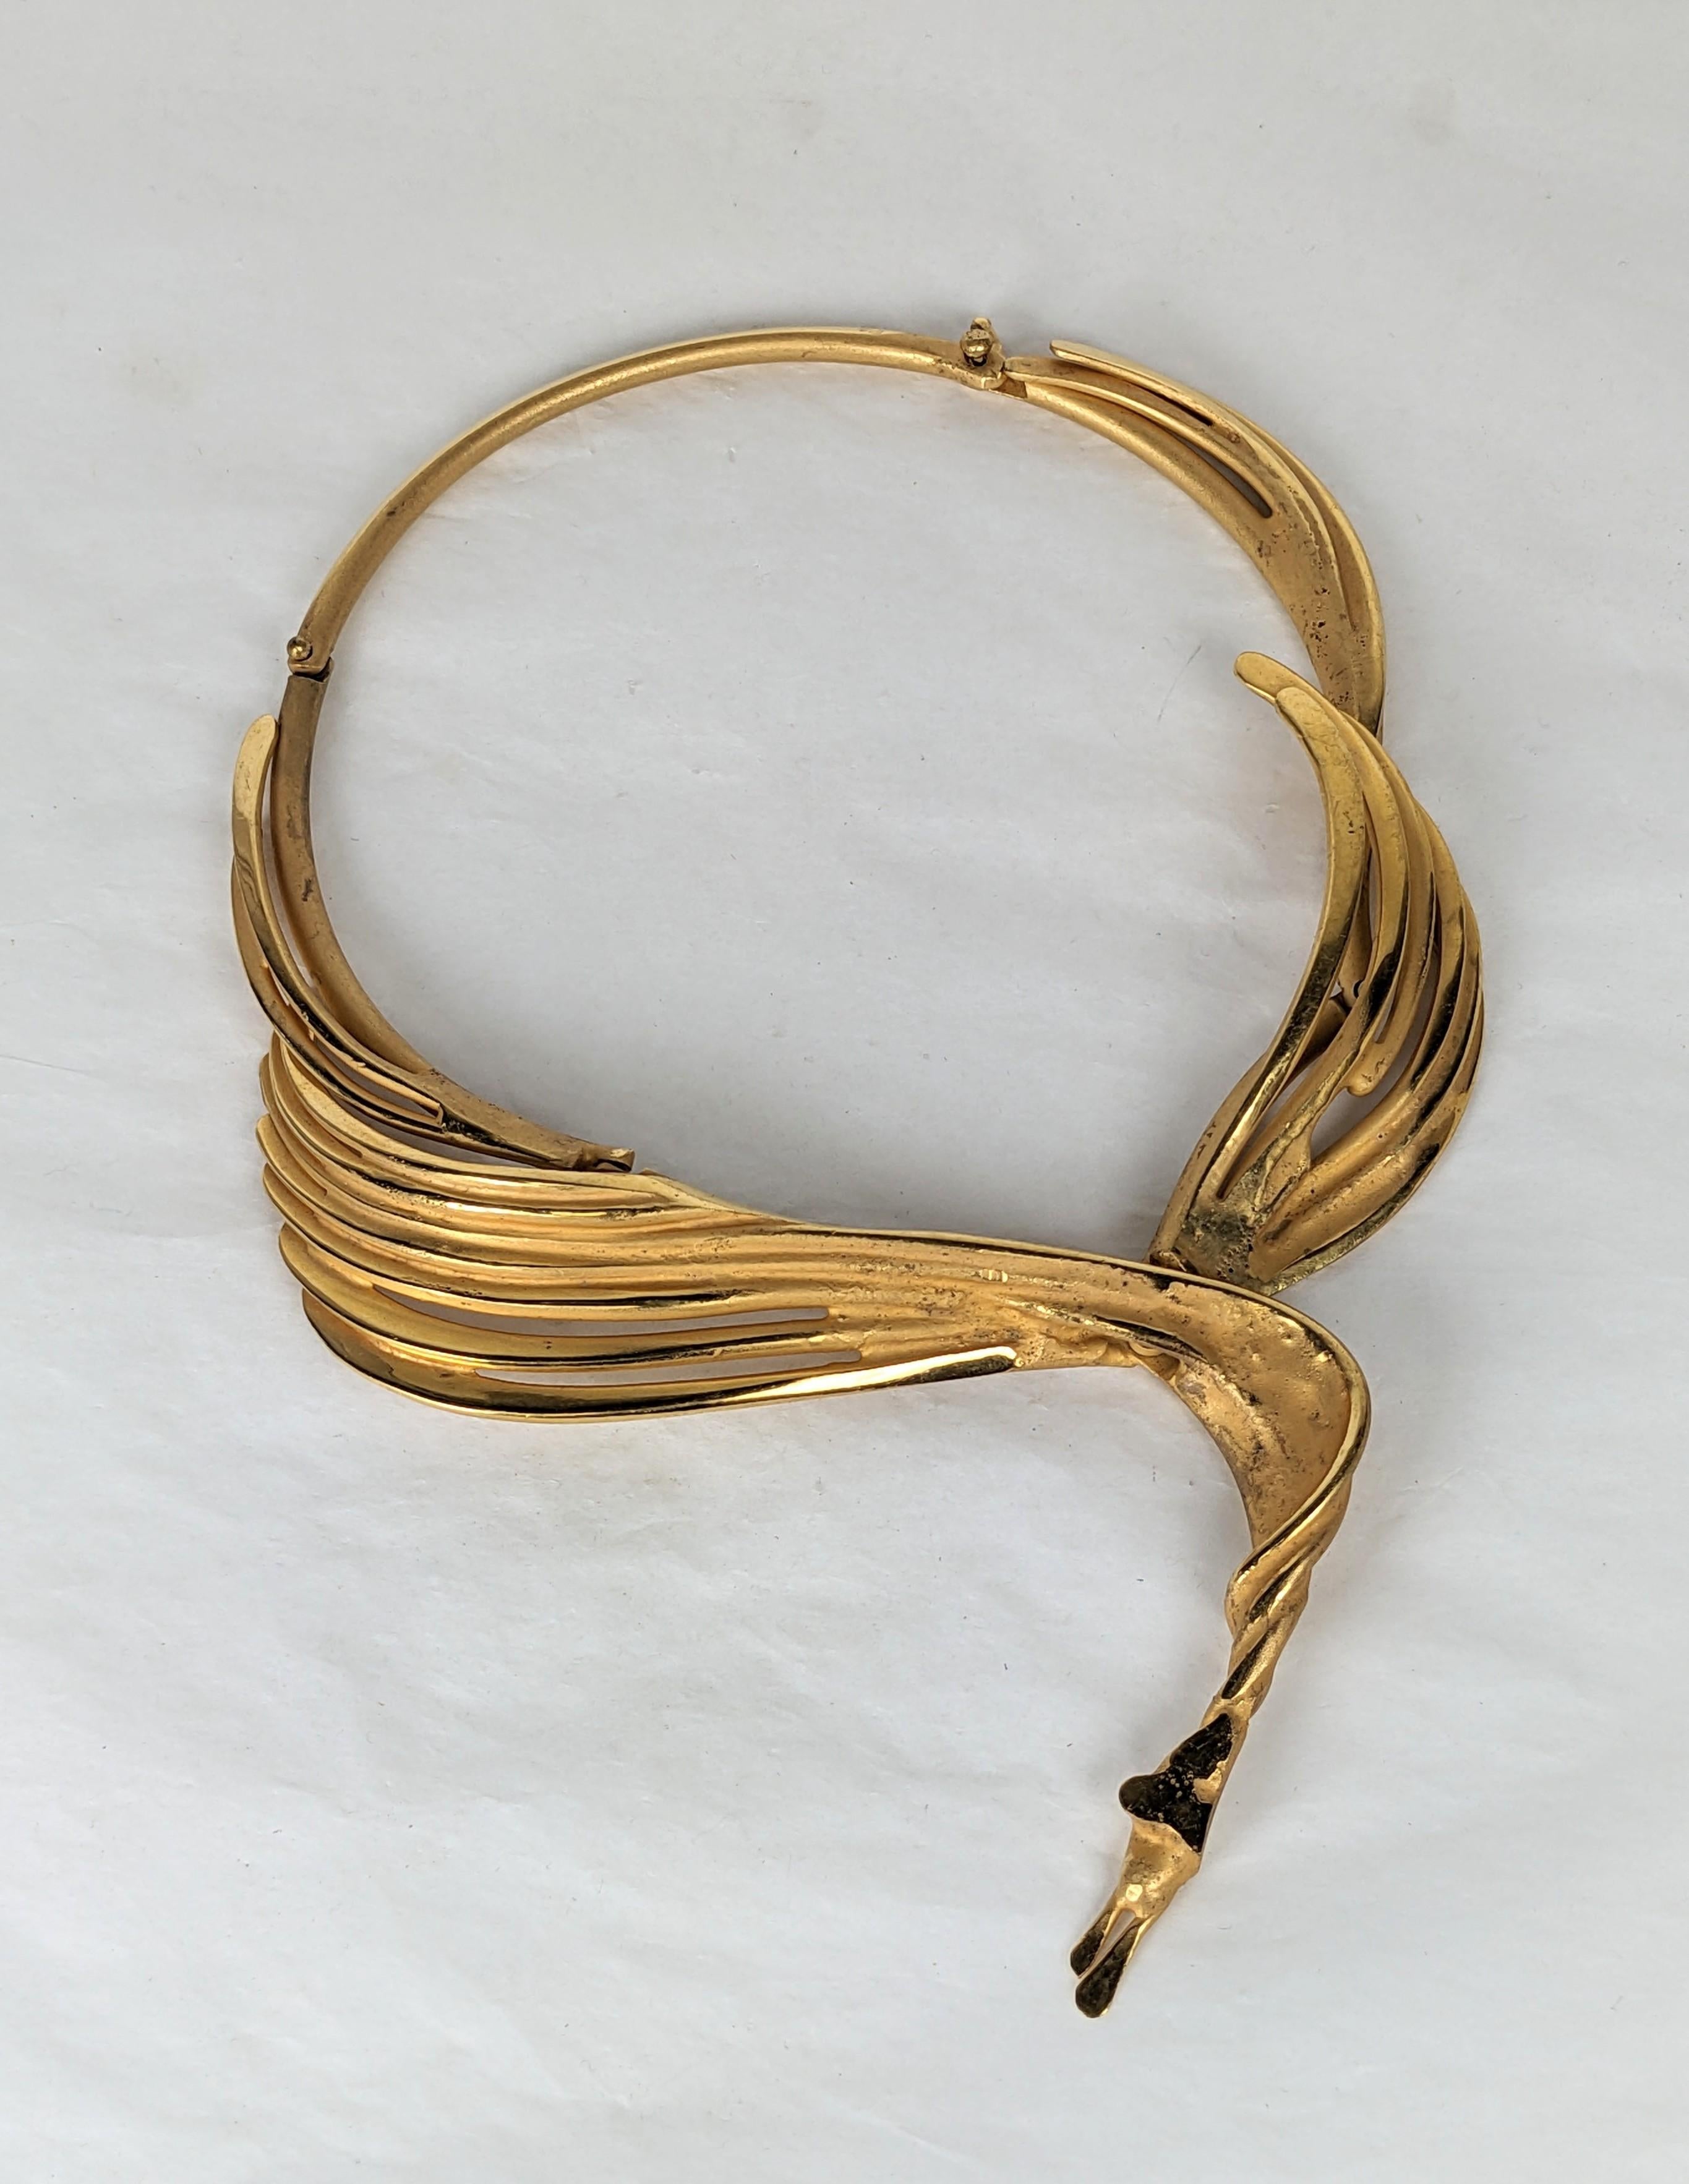 Large and Dramatic French Winged Bronze Artisanal Collar in the Brutalist style from the 1980's. Signed by the maker (Bonillez?) and purchased in a gallery in Paris in the 1980's.
Handmade and heavily articulated with curved rods which are formed